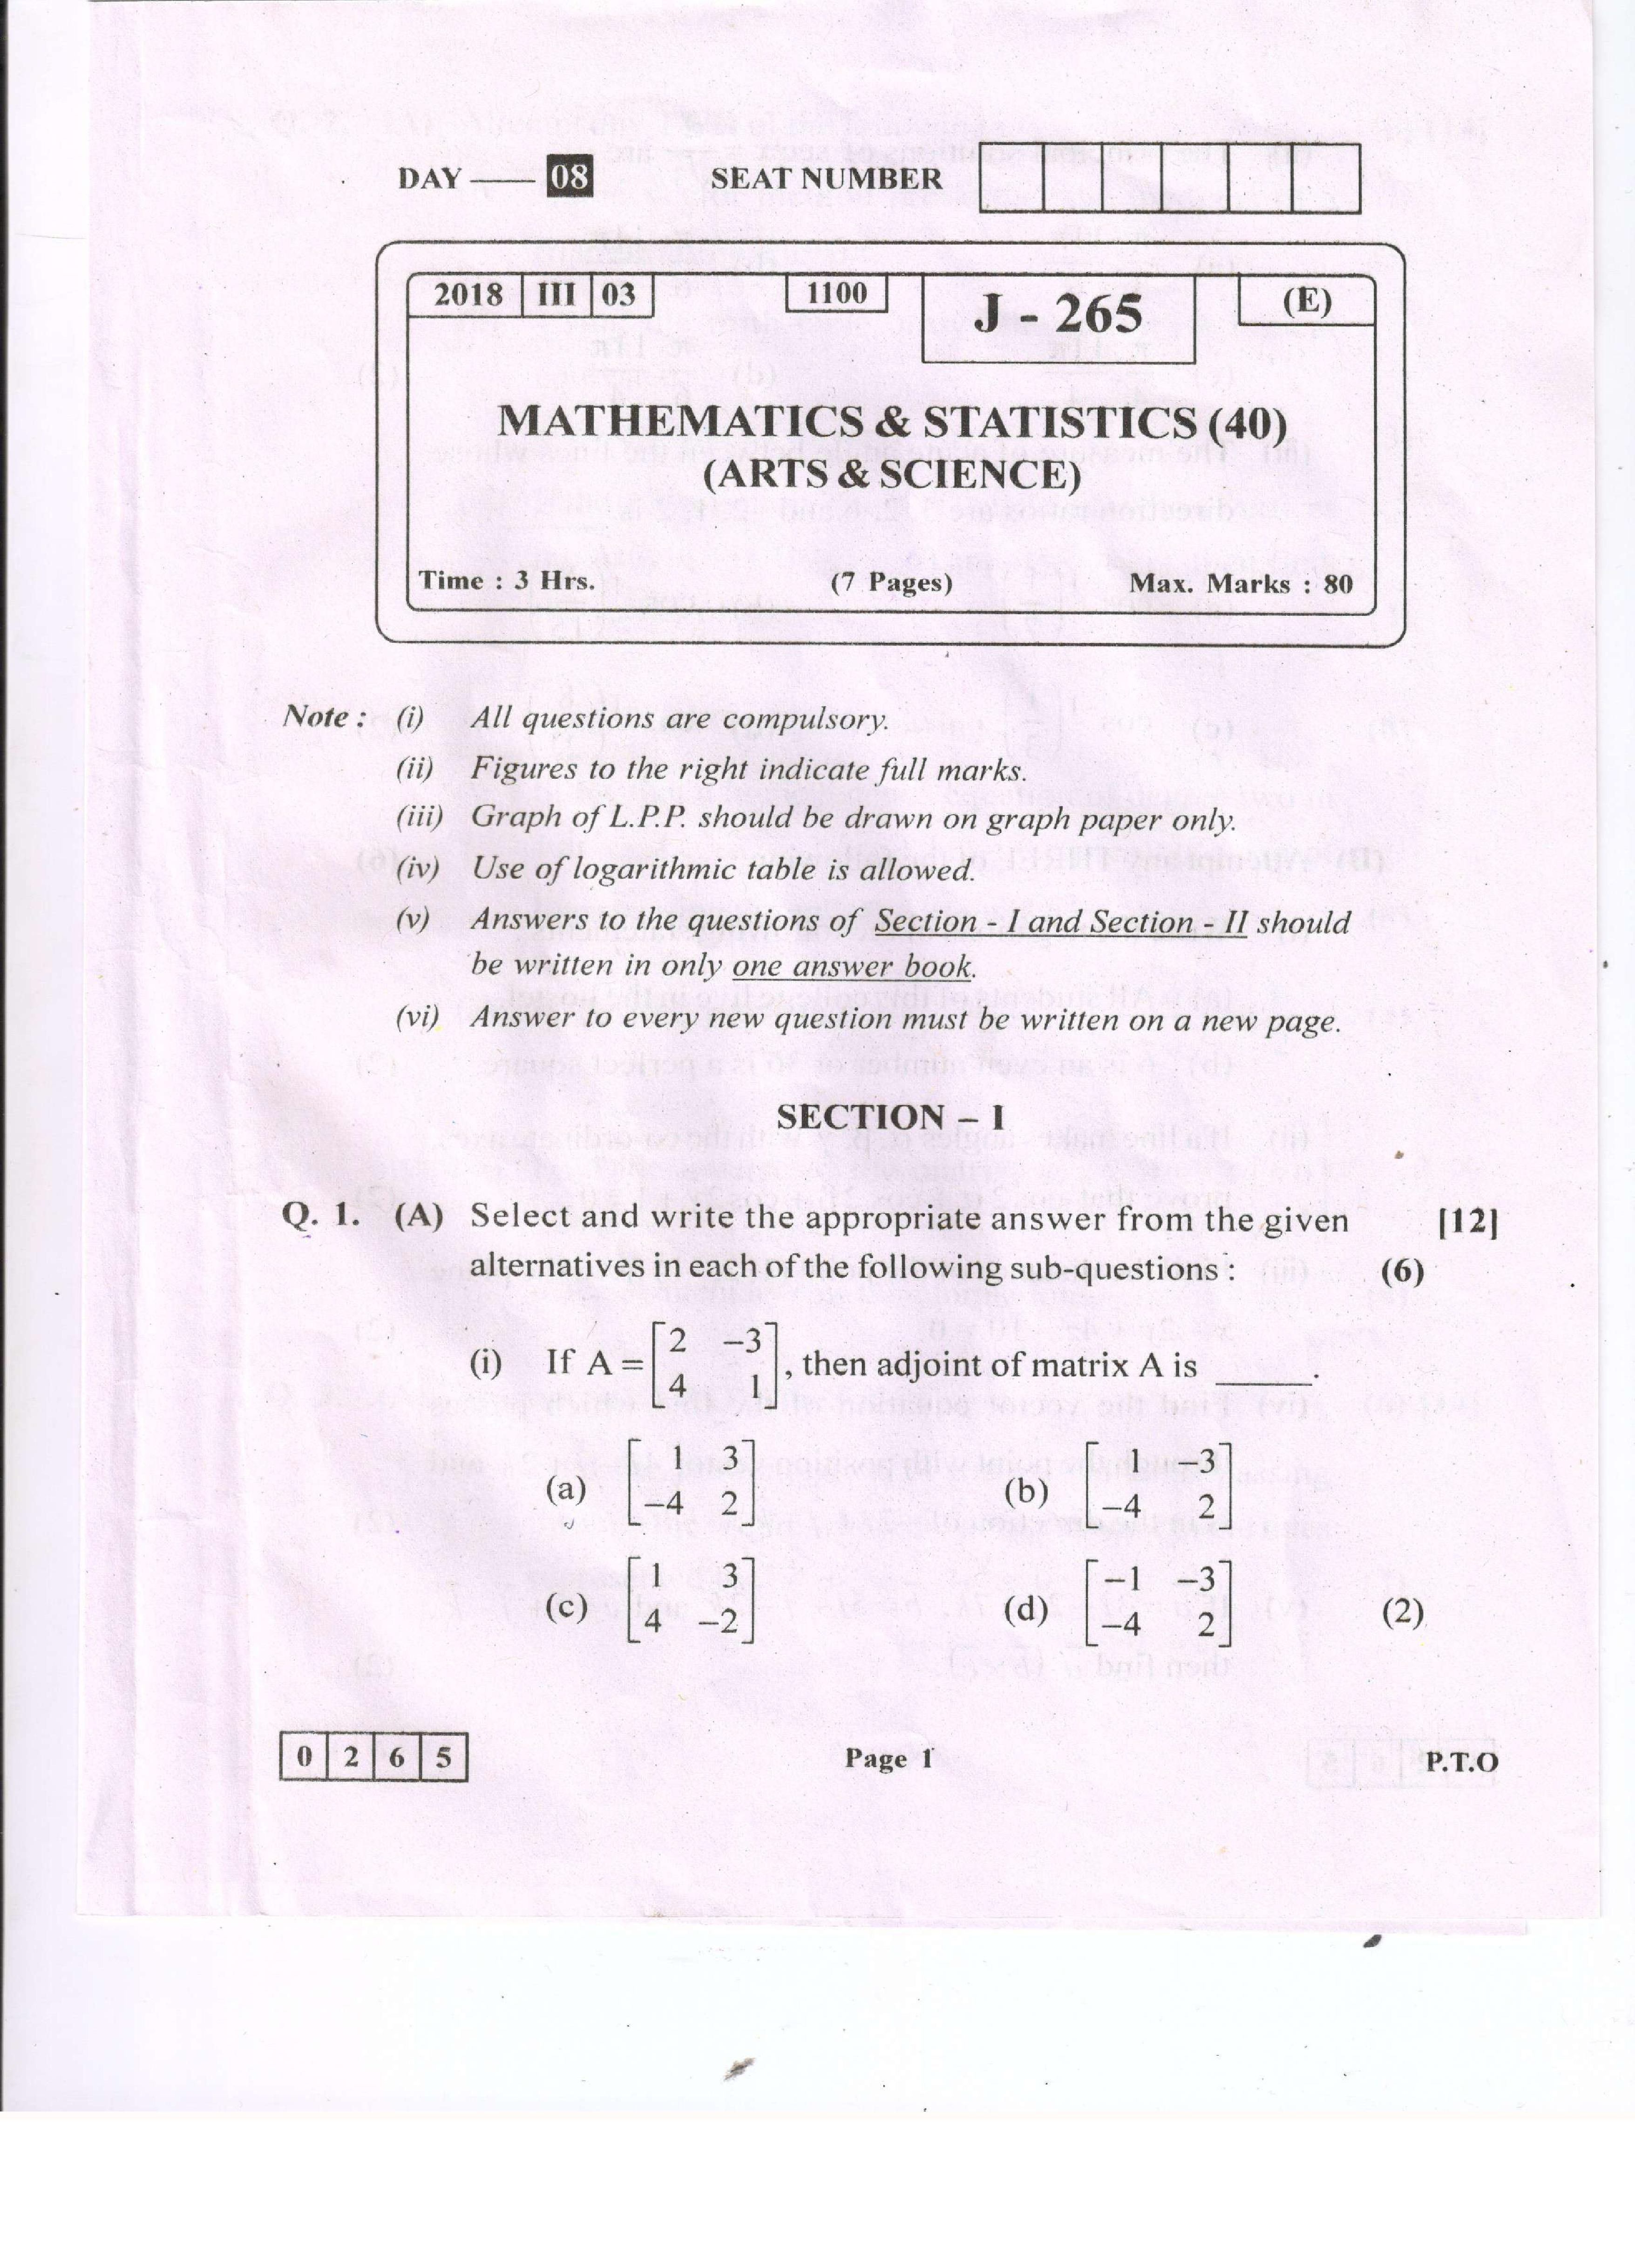 Maharashtra Class 12 Question Paper 2018 Maths - Page 1